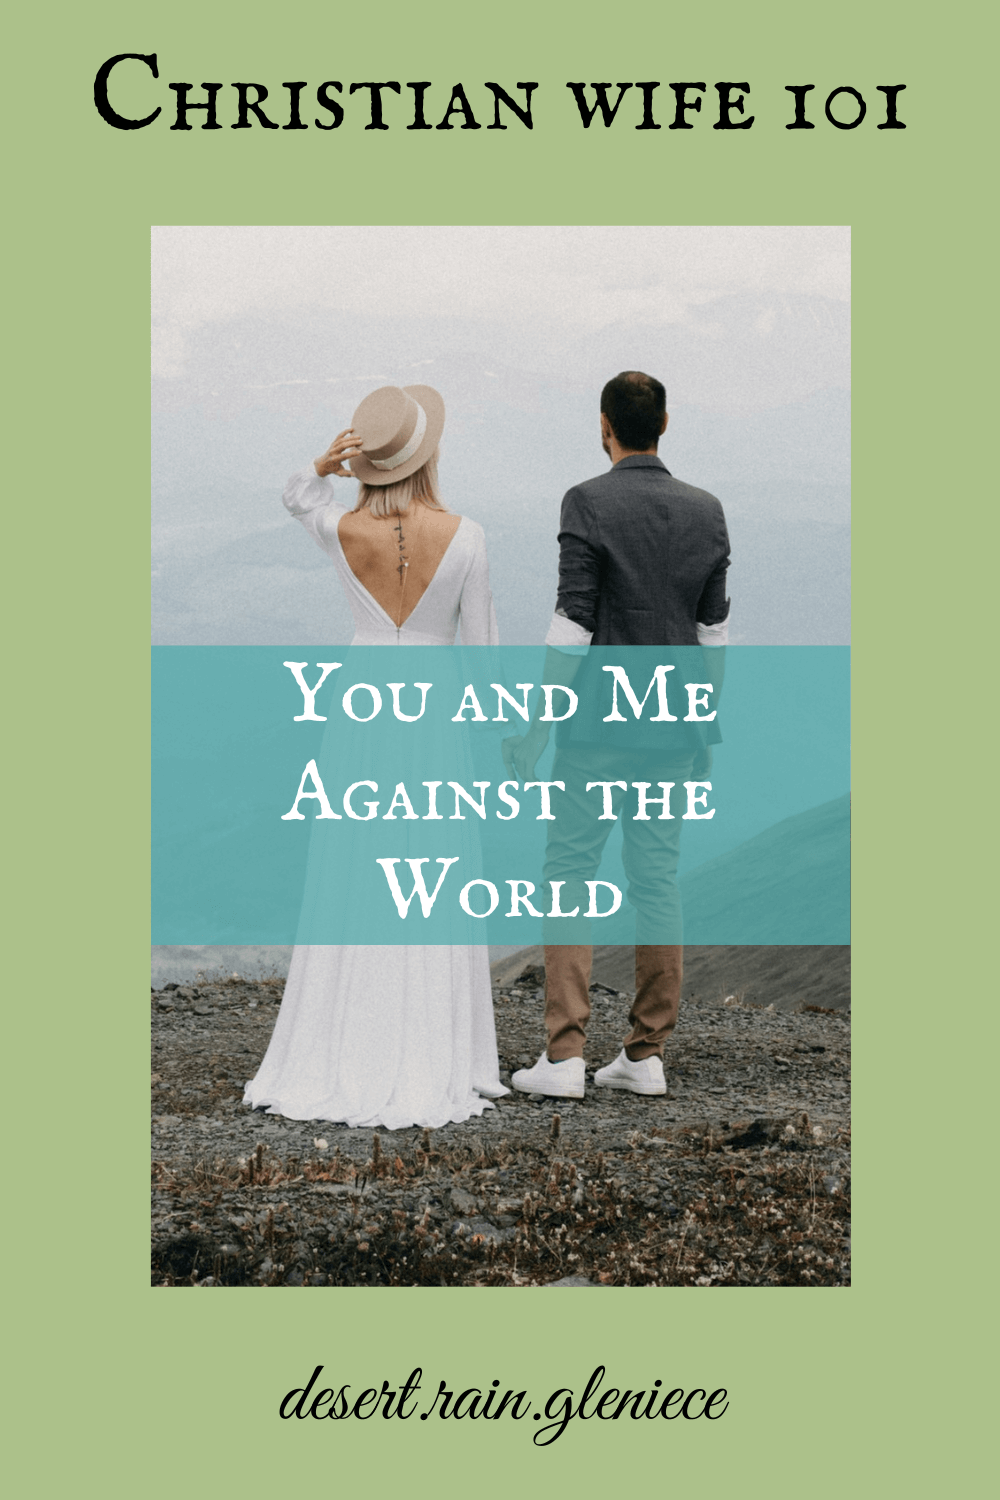 You started marriage on the same side, dear wife. What happened? Let God help you find the peace of oneness you desire while you defy the prince of this world. #christianwife101, #godlymarriage, #peace. #oneness